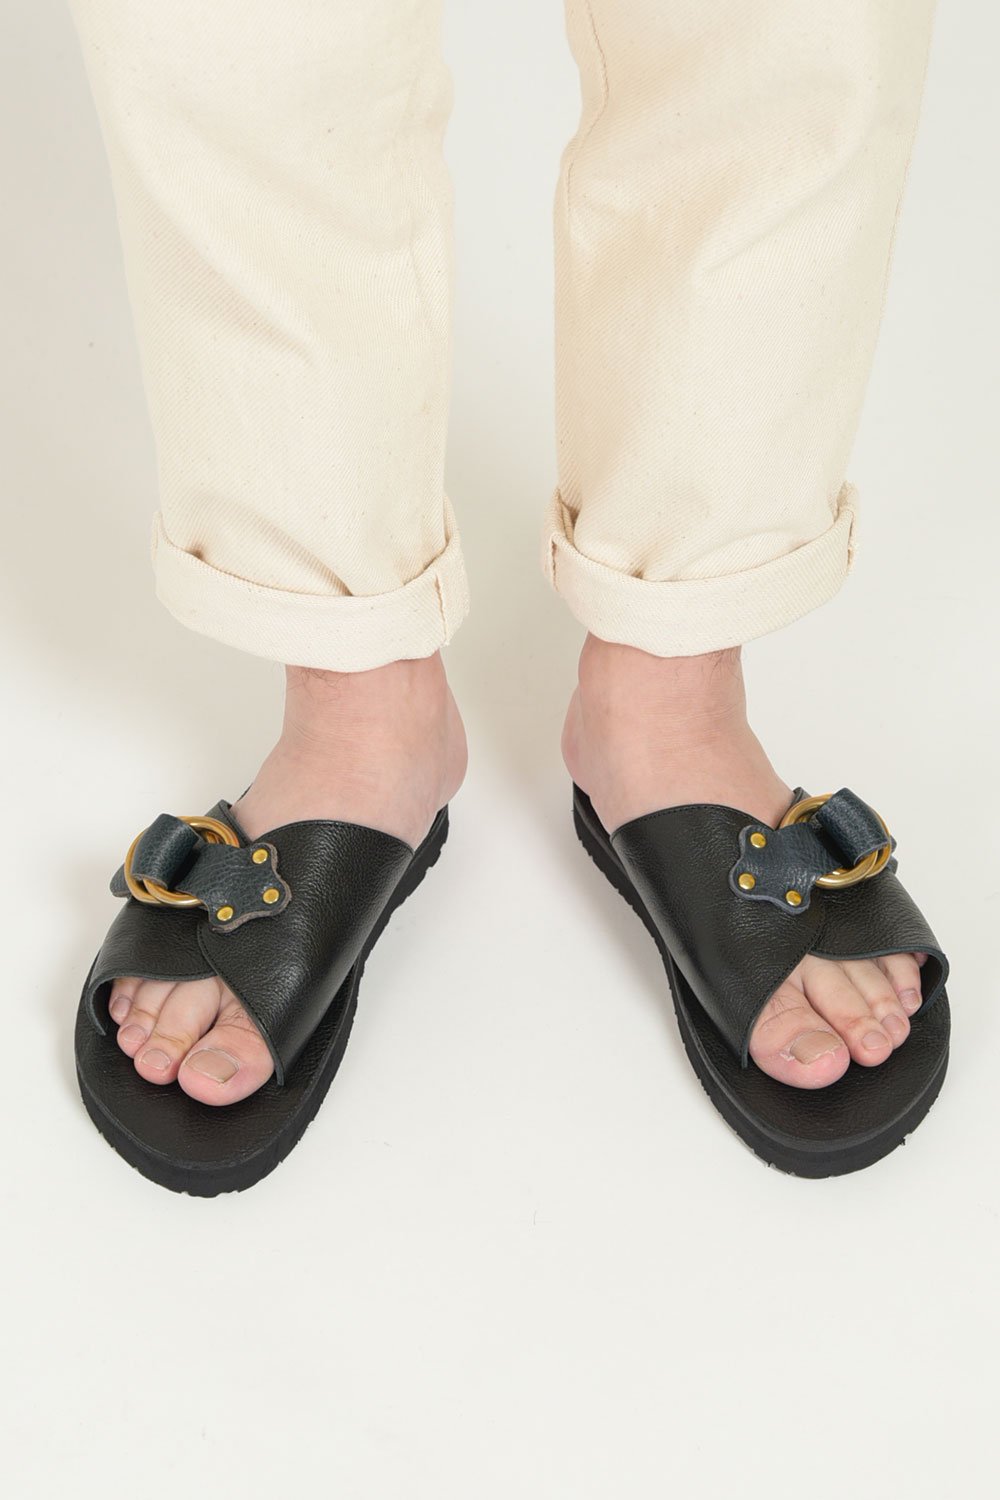 JELADO(ジェラード) サンダル LEATHER SANDALS EAST RIVER AG22924 通販正規取扱 |  ハーレムストア公式通販サイト